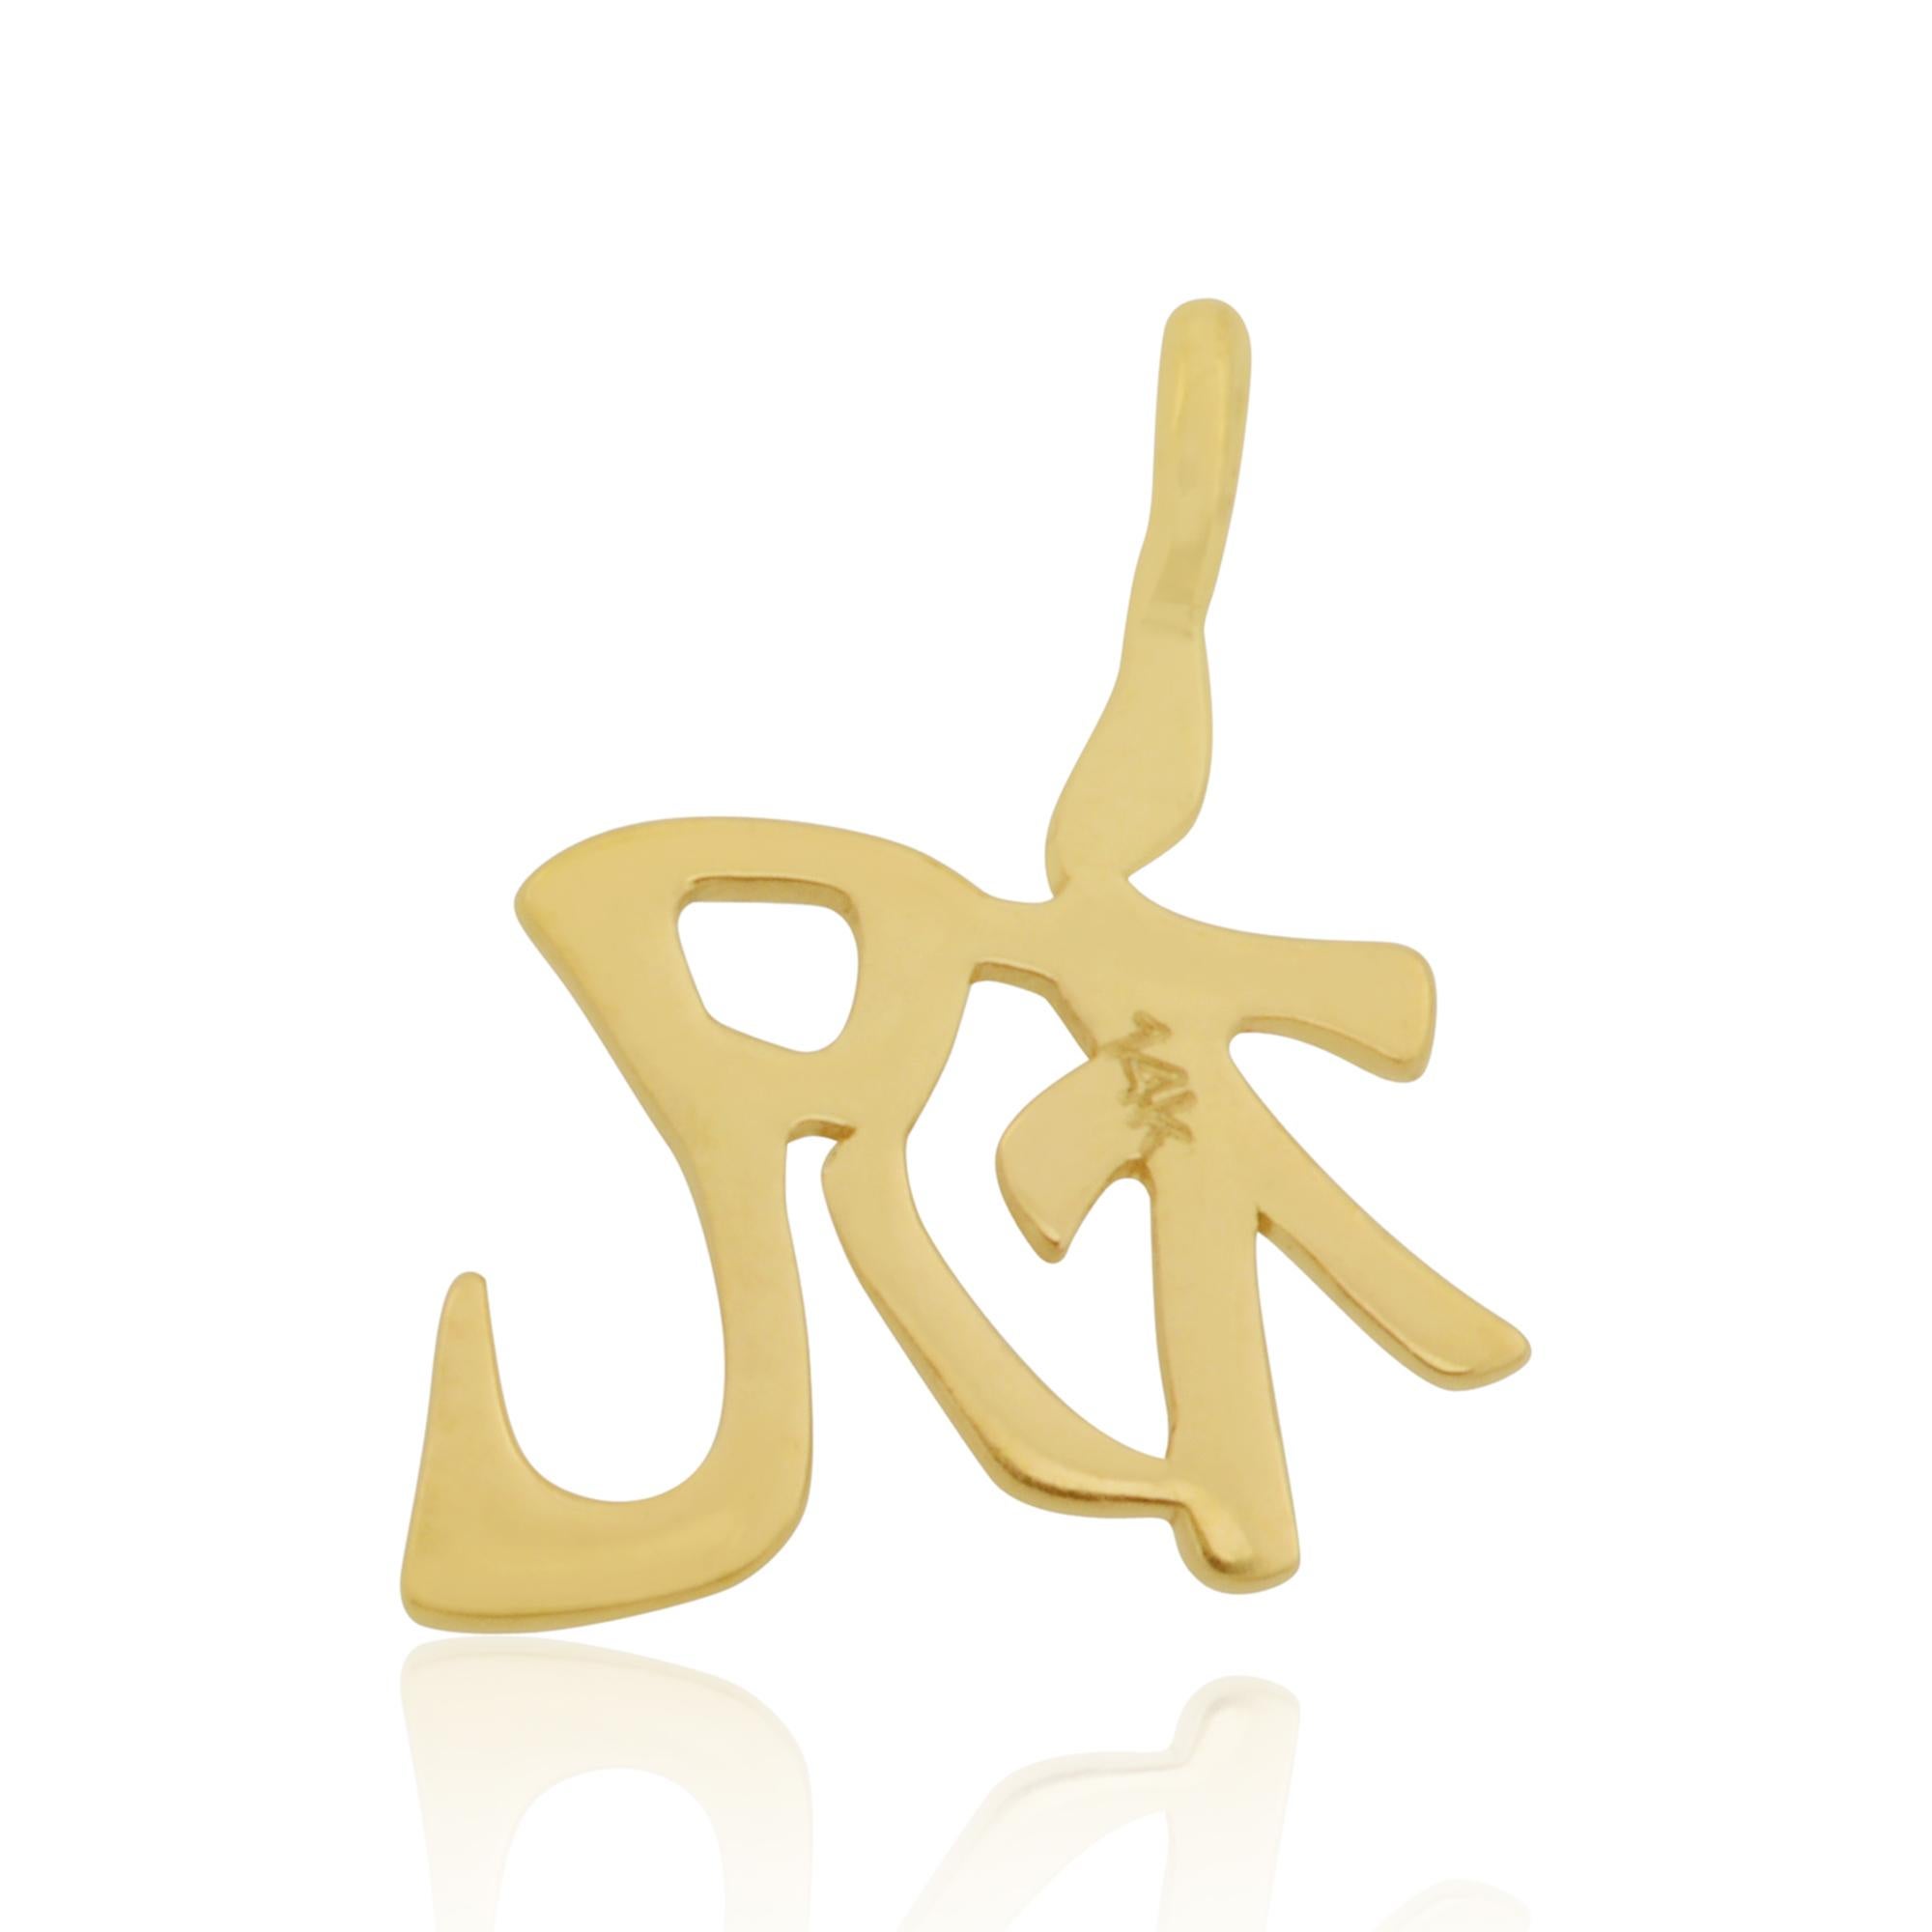 The celebration symbol holds deep meaning in Japanese culture, representing joy, happiness, and the commemoration of special moments and achievements. It serves as a powerful reminder to embrace life's joys and celebrate milestones with gratitude